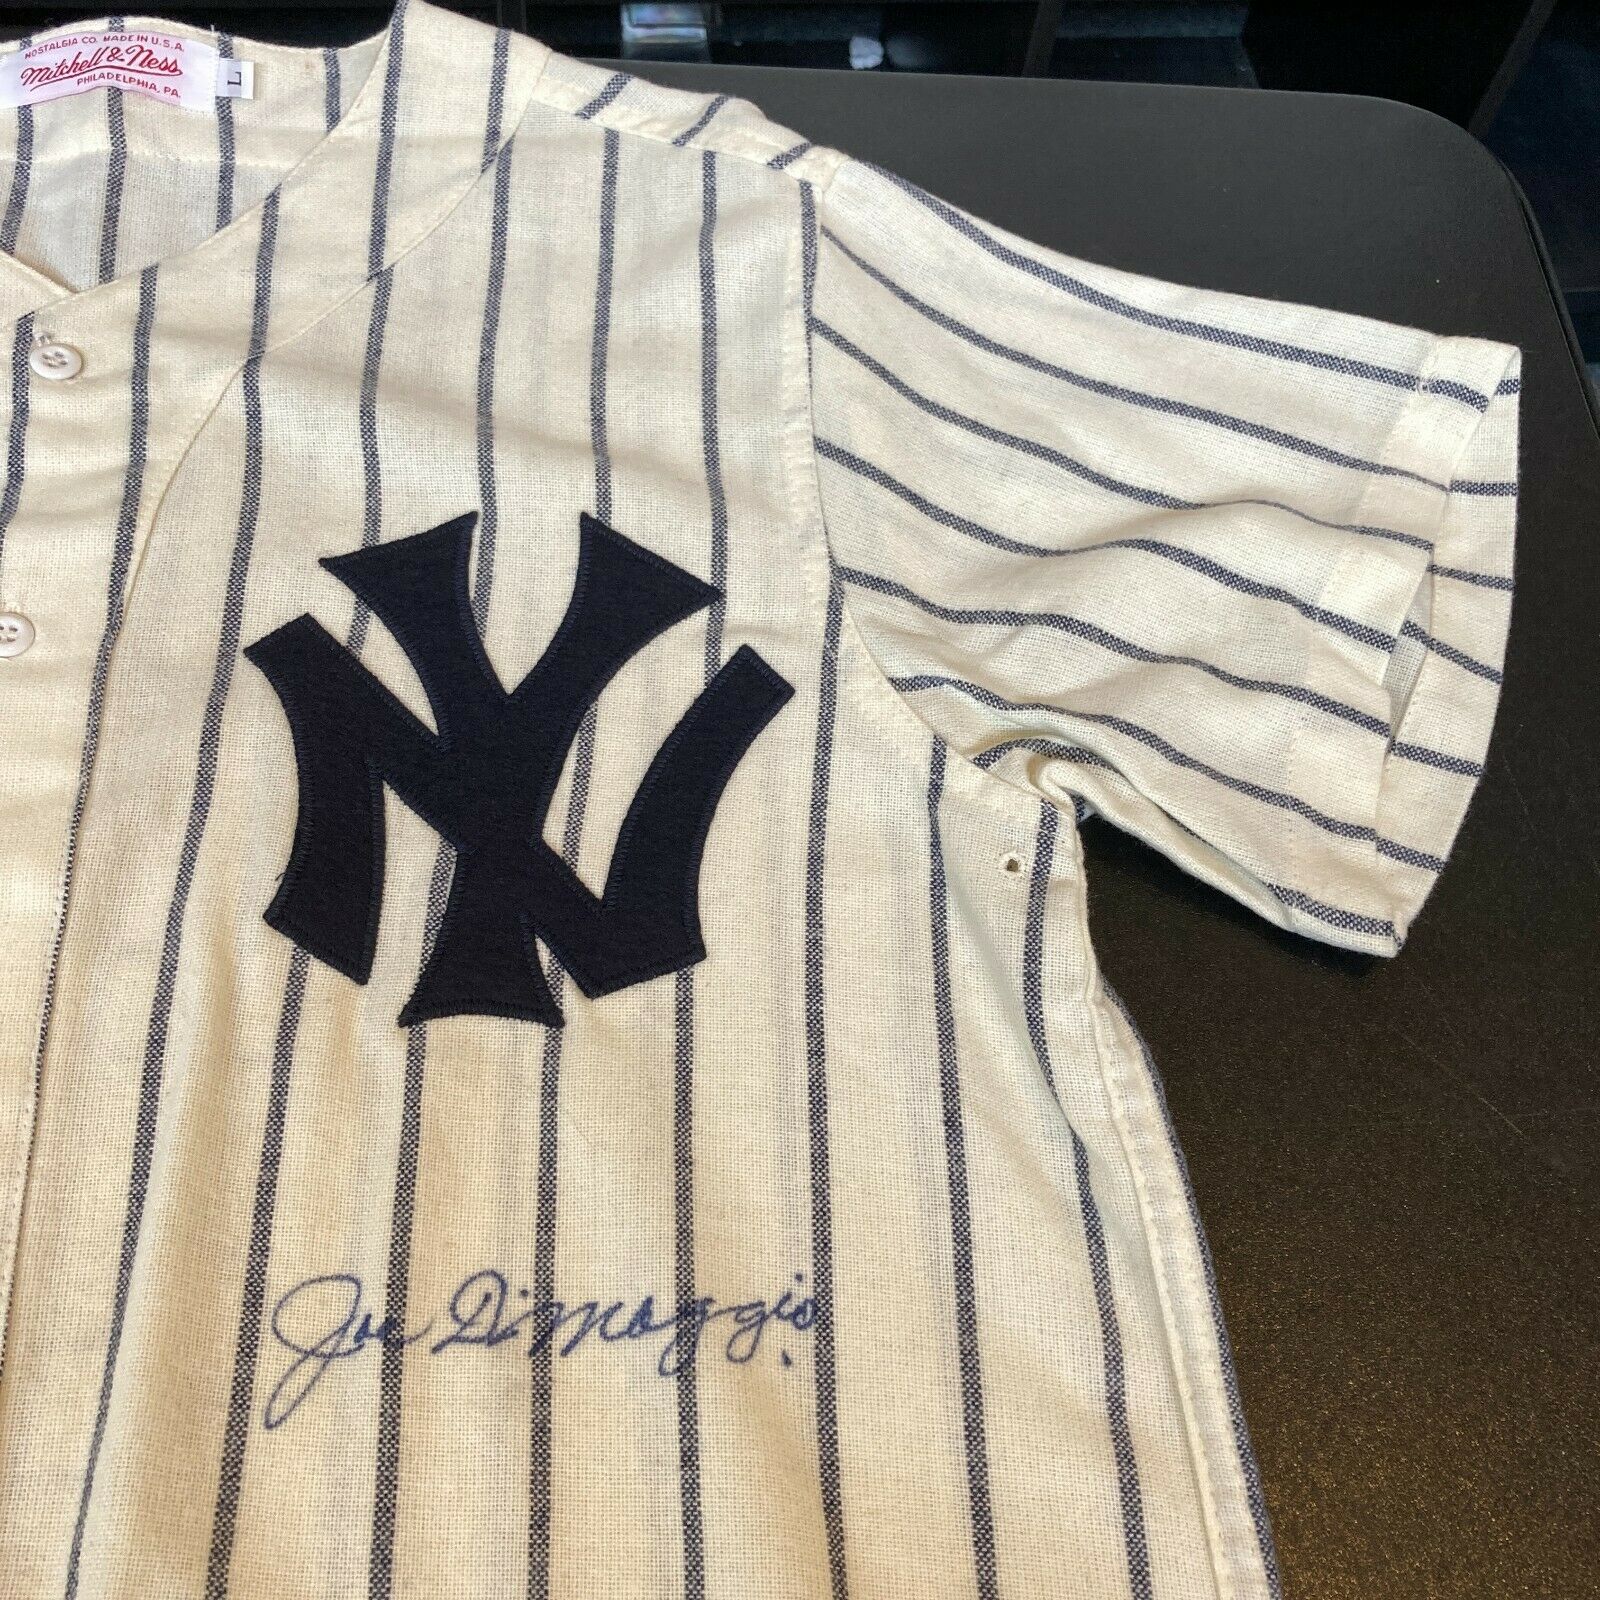 Joe Dimaggio Signed 1941 New York Yankees Game Model Jersey With